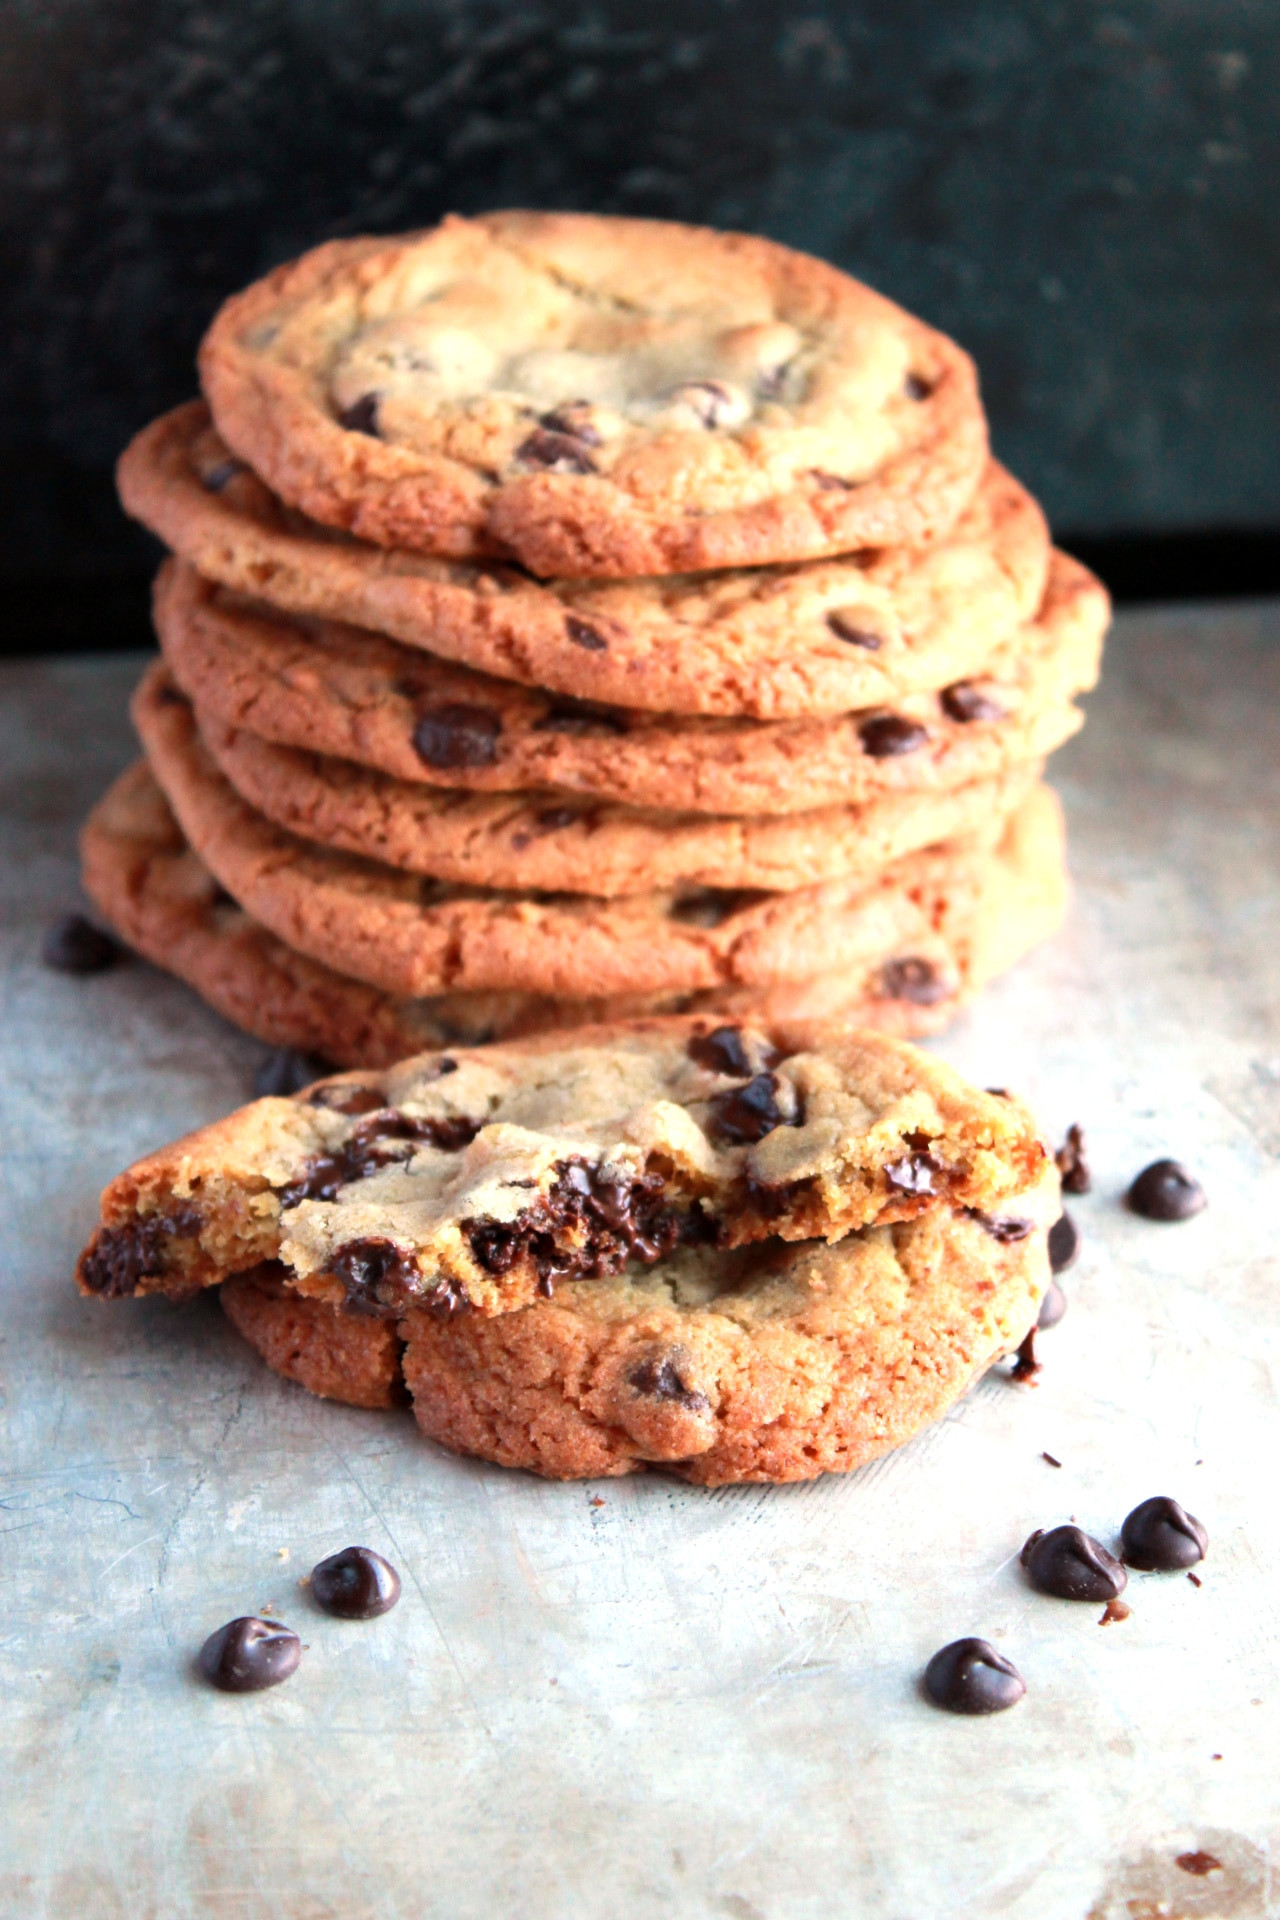 Classic Chocolate Chip Cookies Recipes
 Chocolate Chip Cookies Tjis rcipe is perfection in a cookie